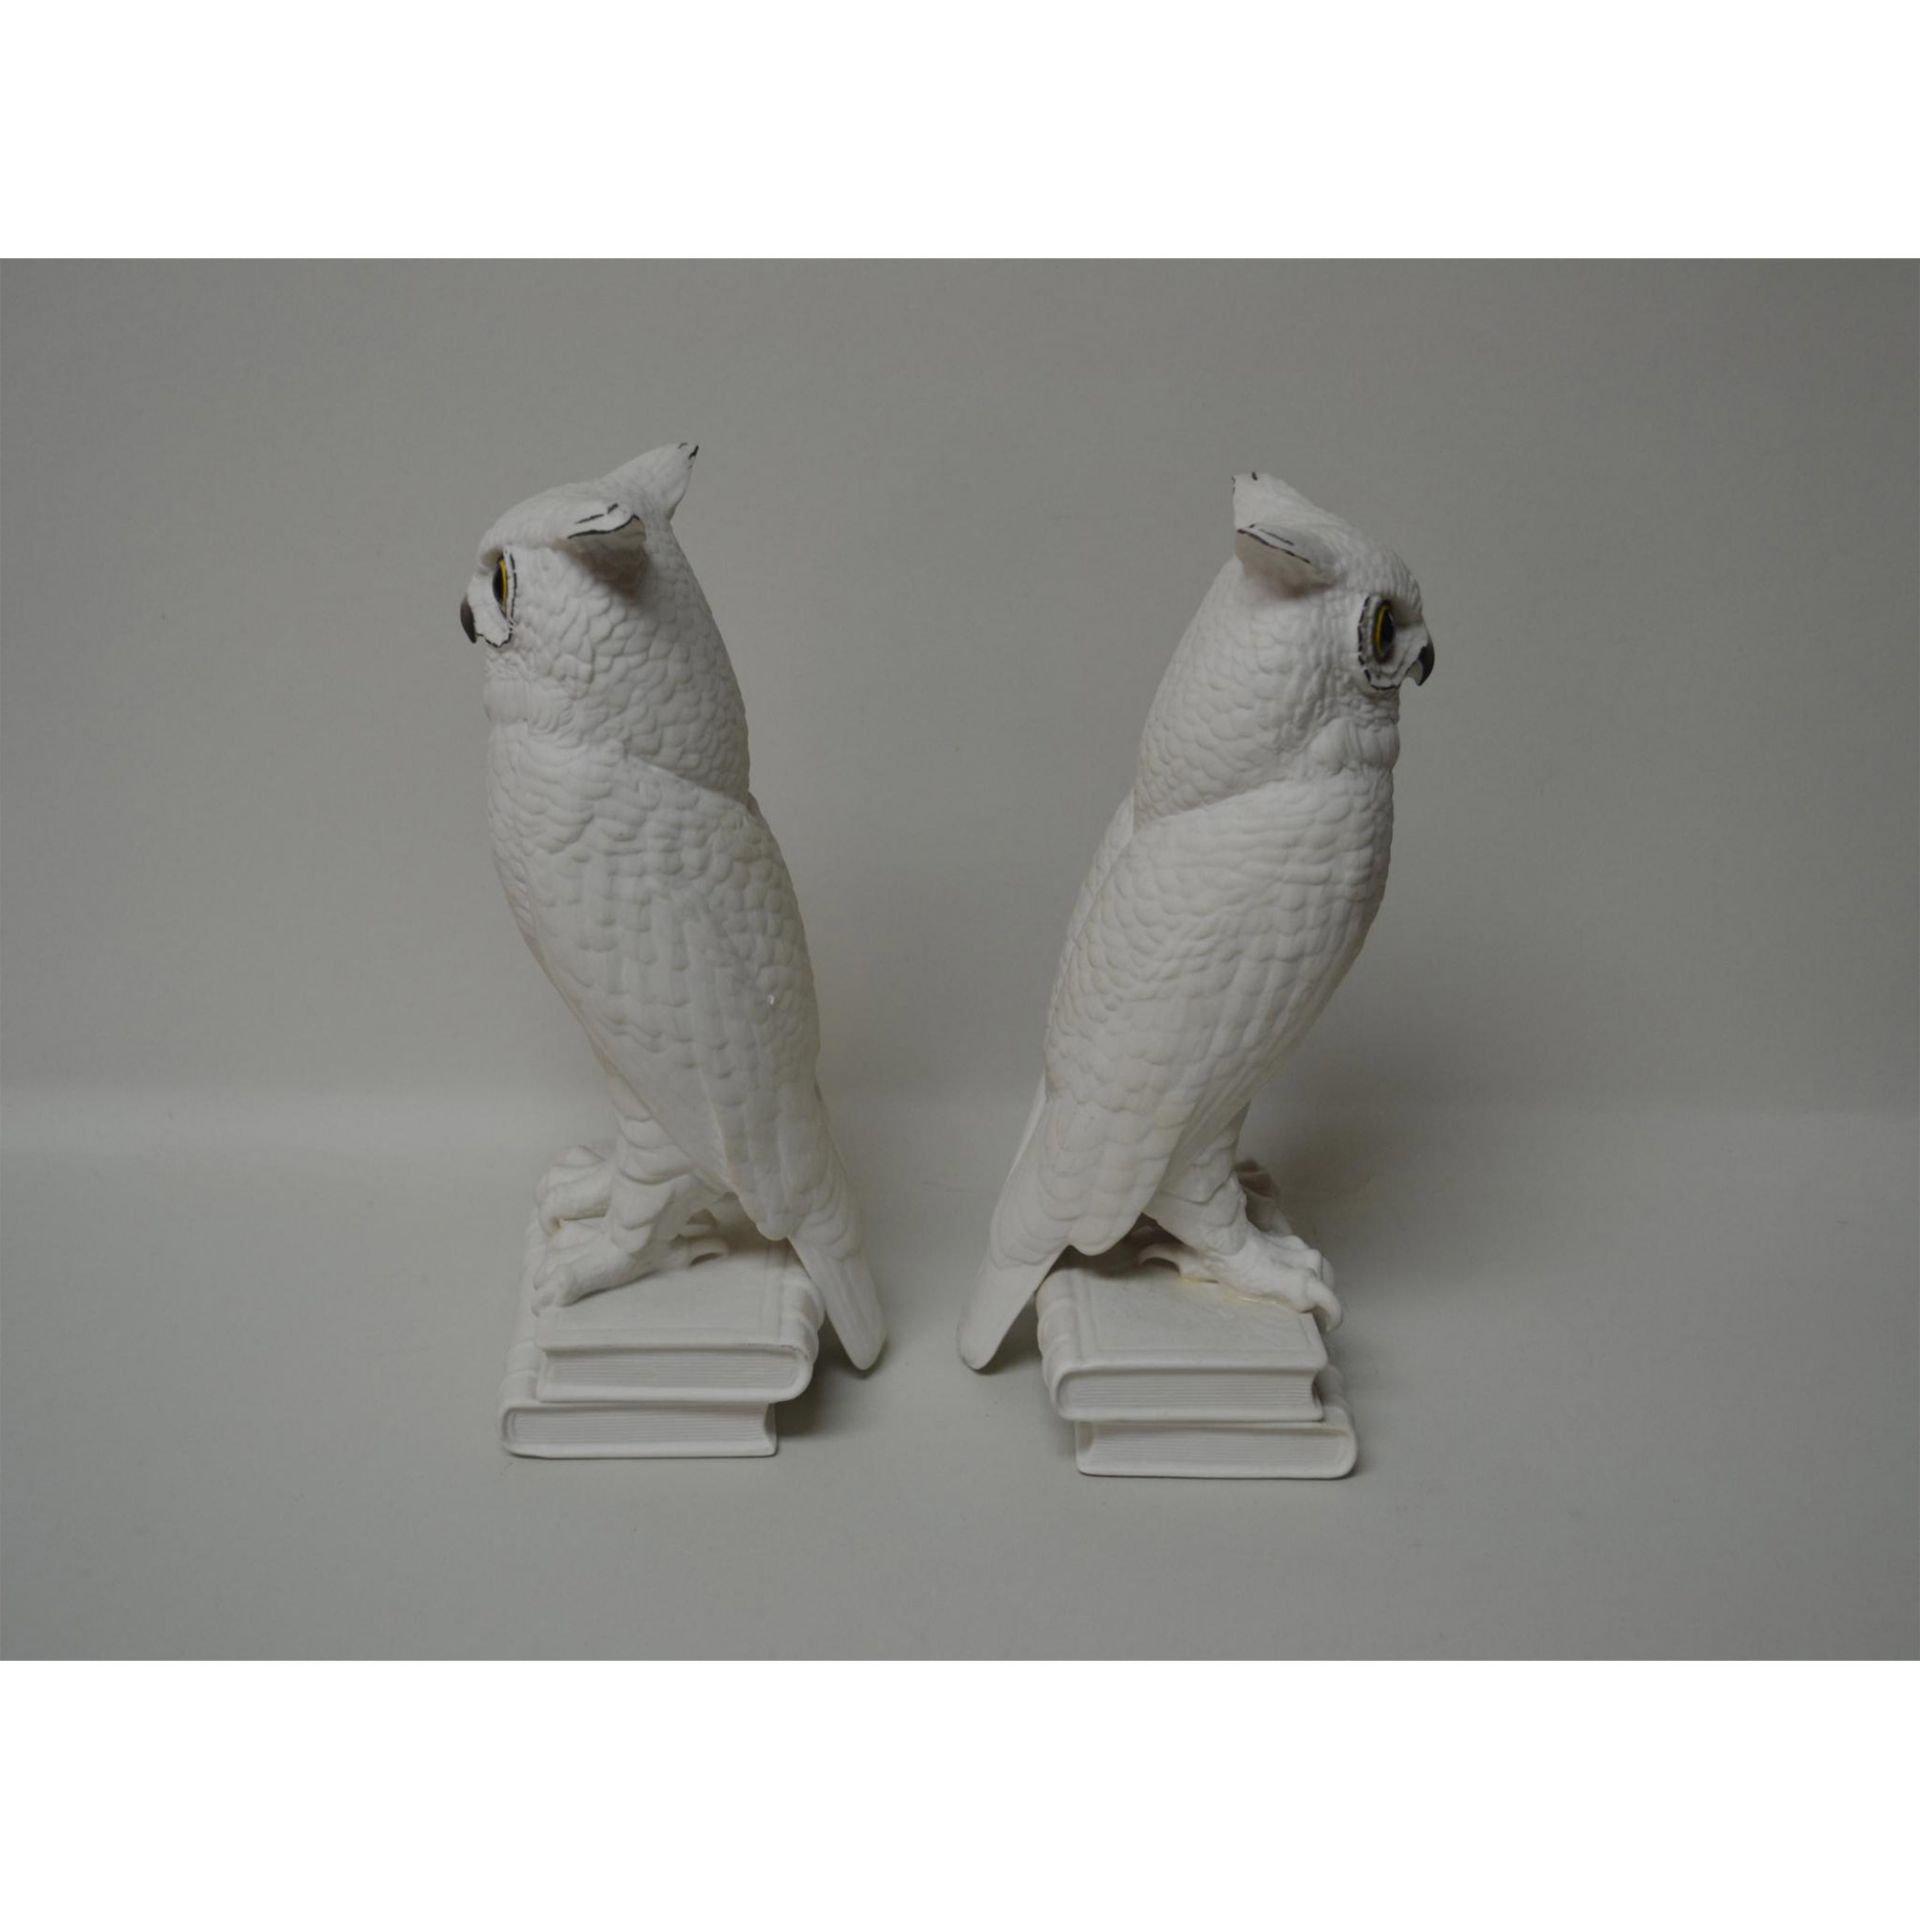 Boehm Porcelain Owl Bookends, Pair, Early, 1960 - Image 2 of 5